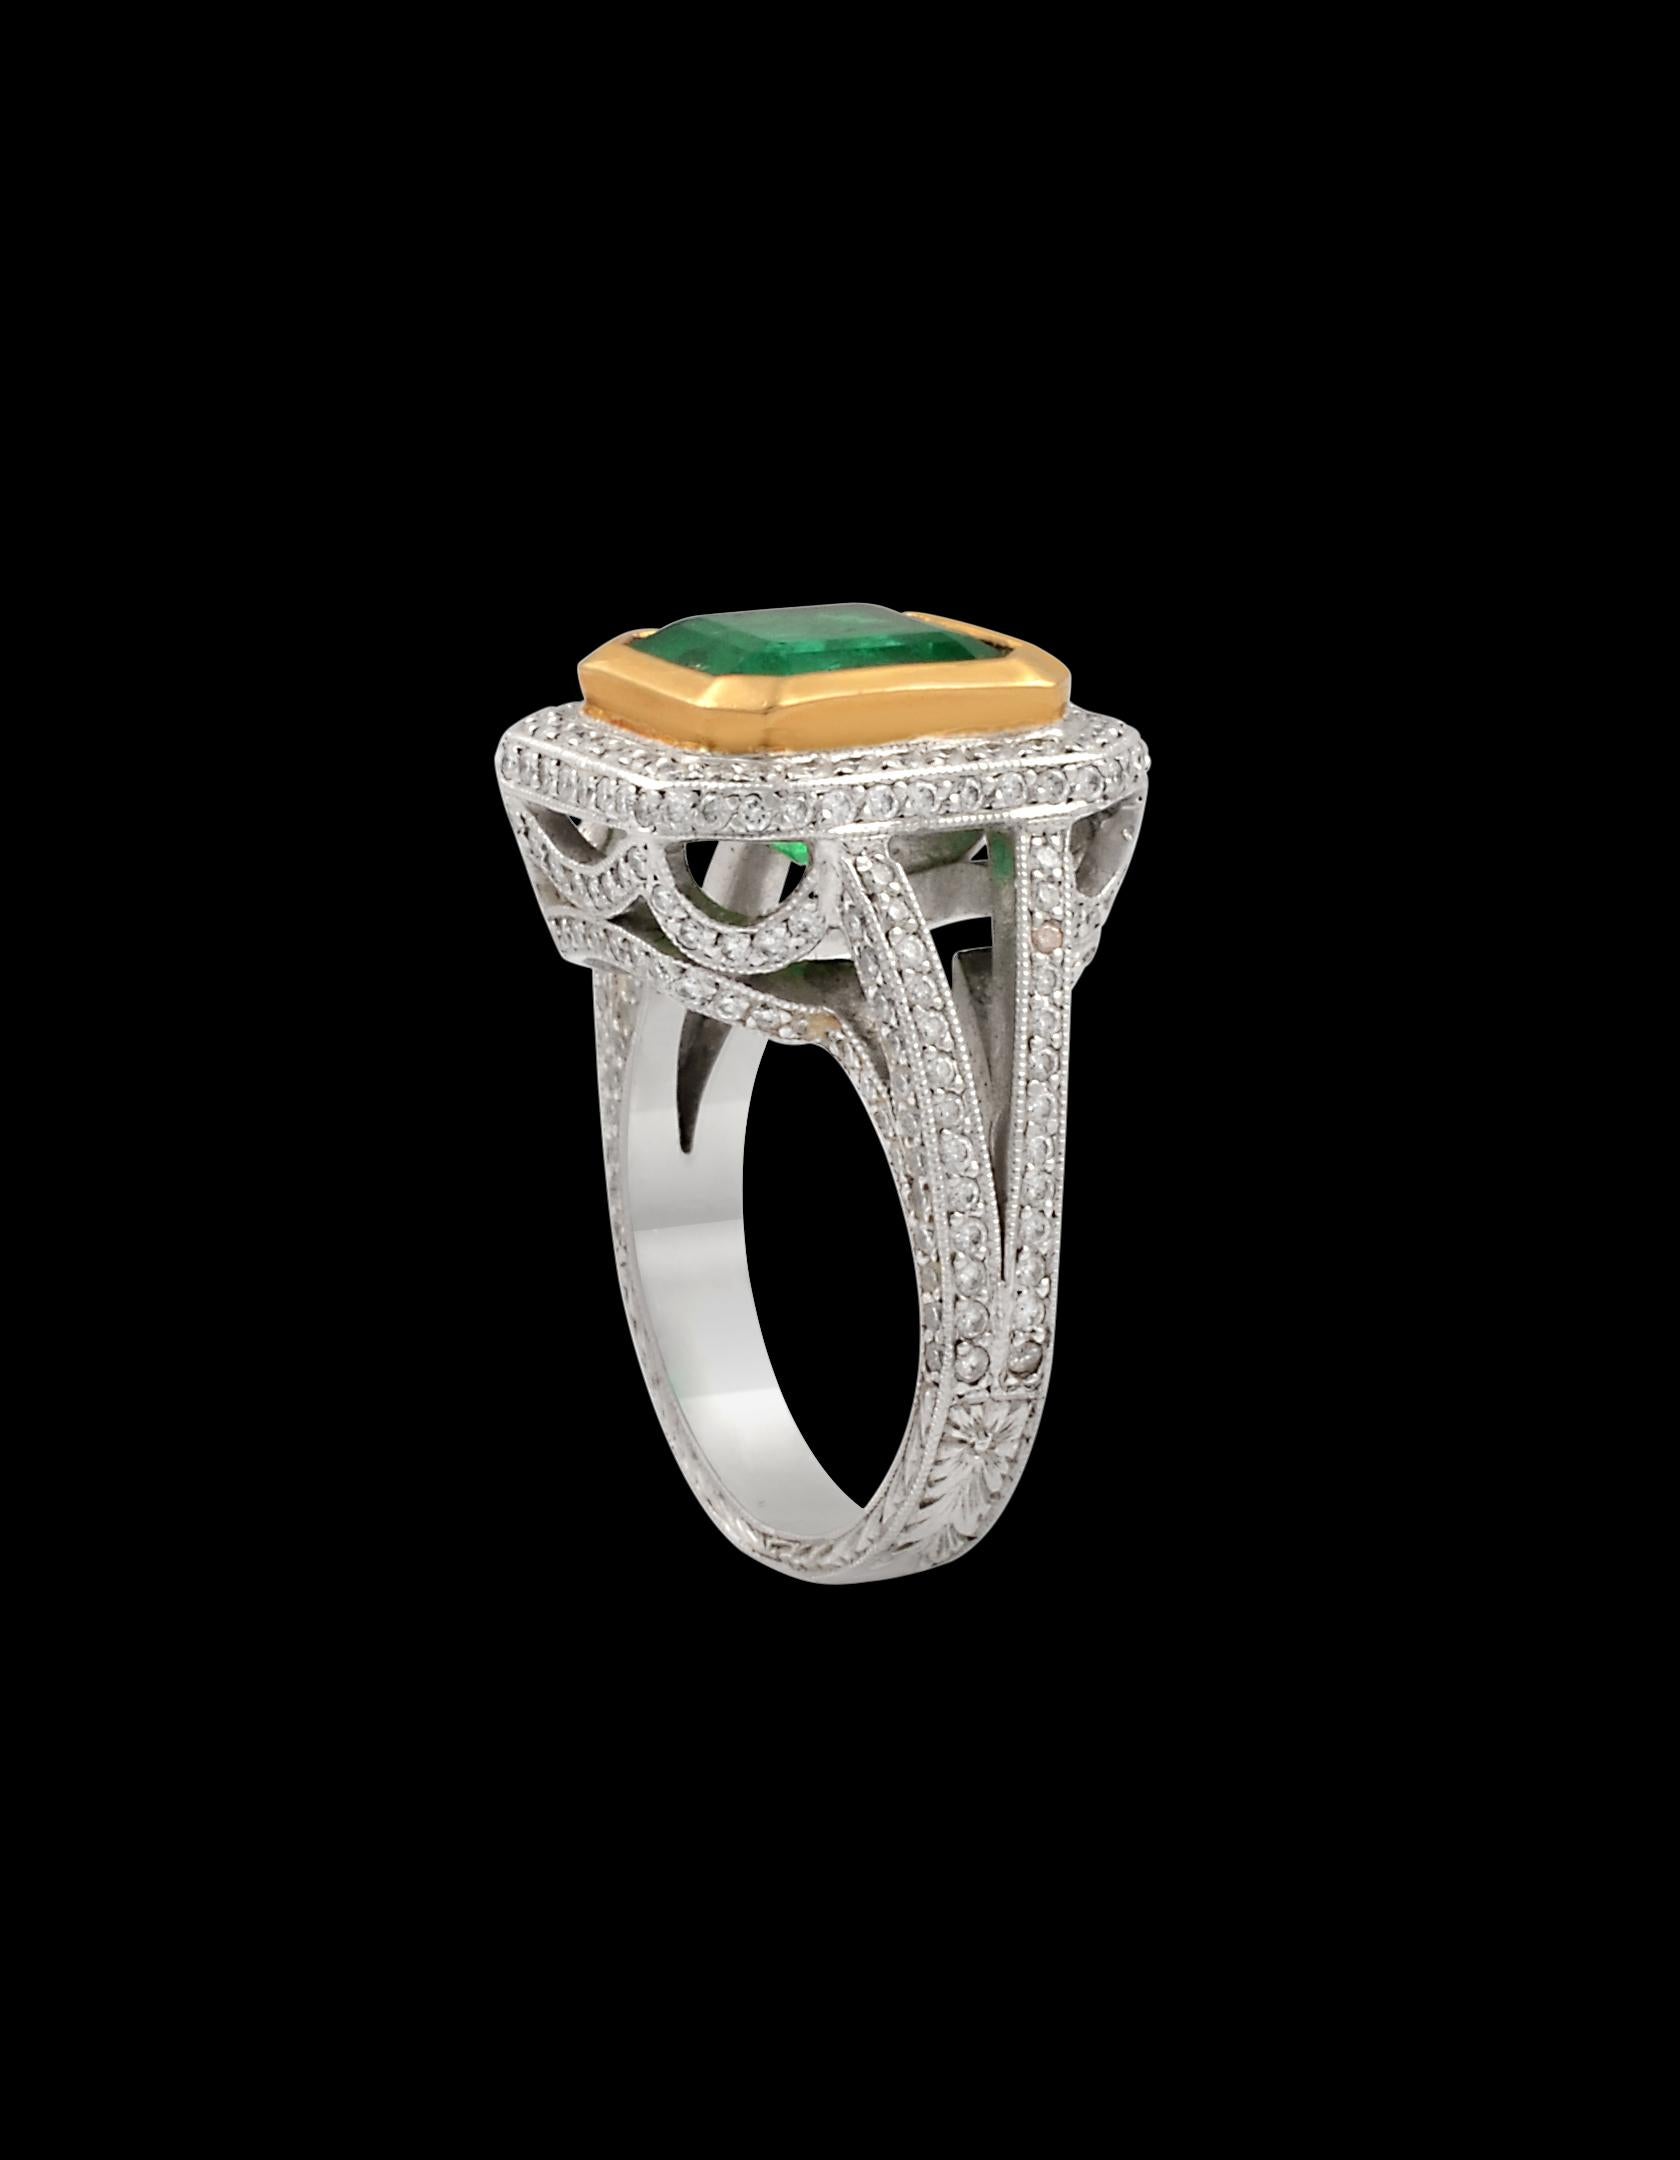 3.8 Carat Emerald Cut Colombian Emerald and Diamond Ring Platinum, Two-Tone 7